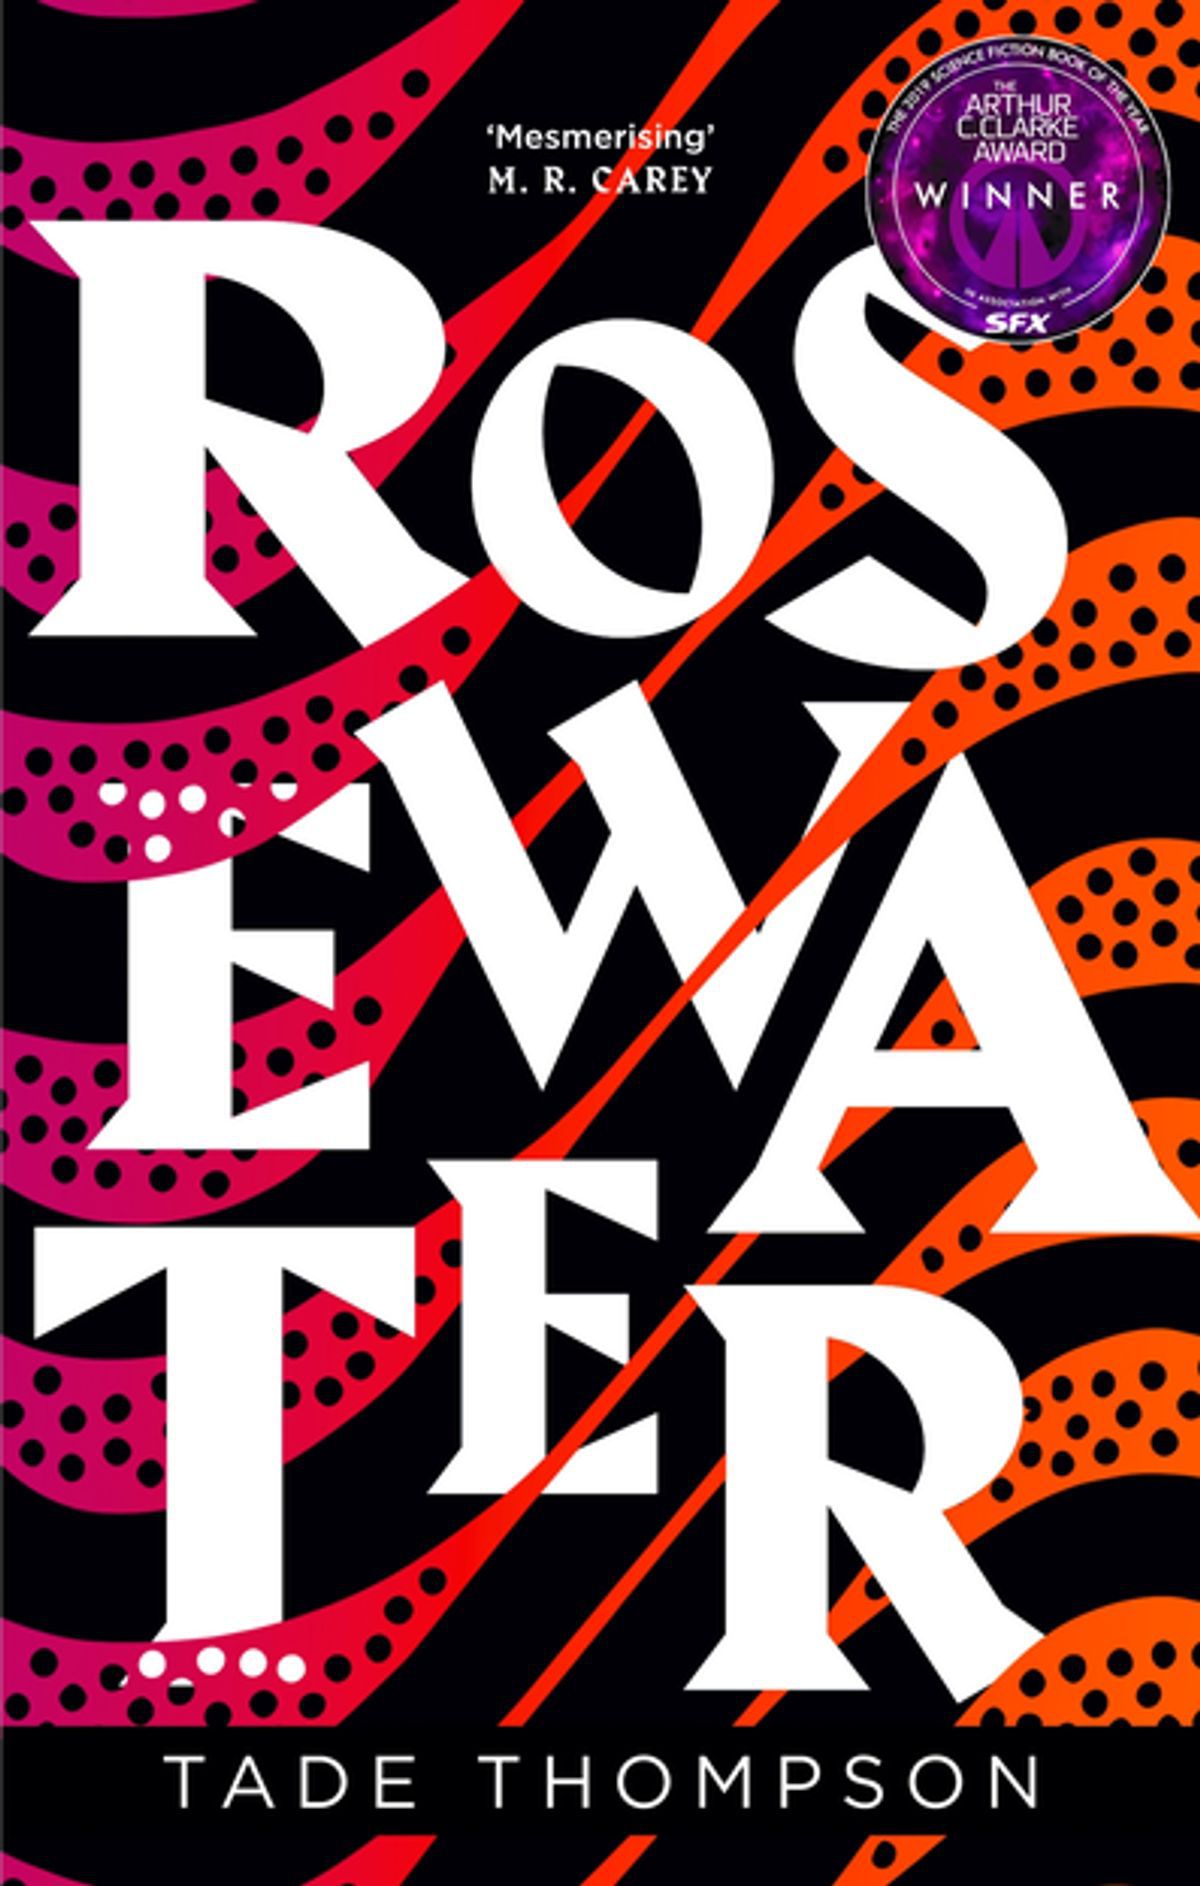 The cover of Tade Thompson’s Rosewater